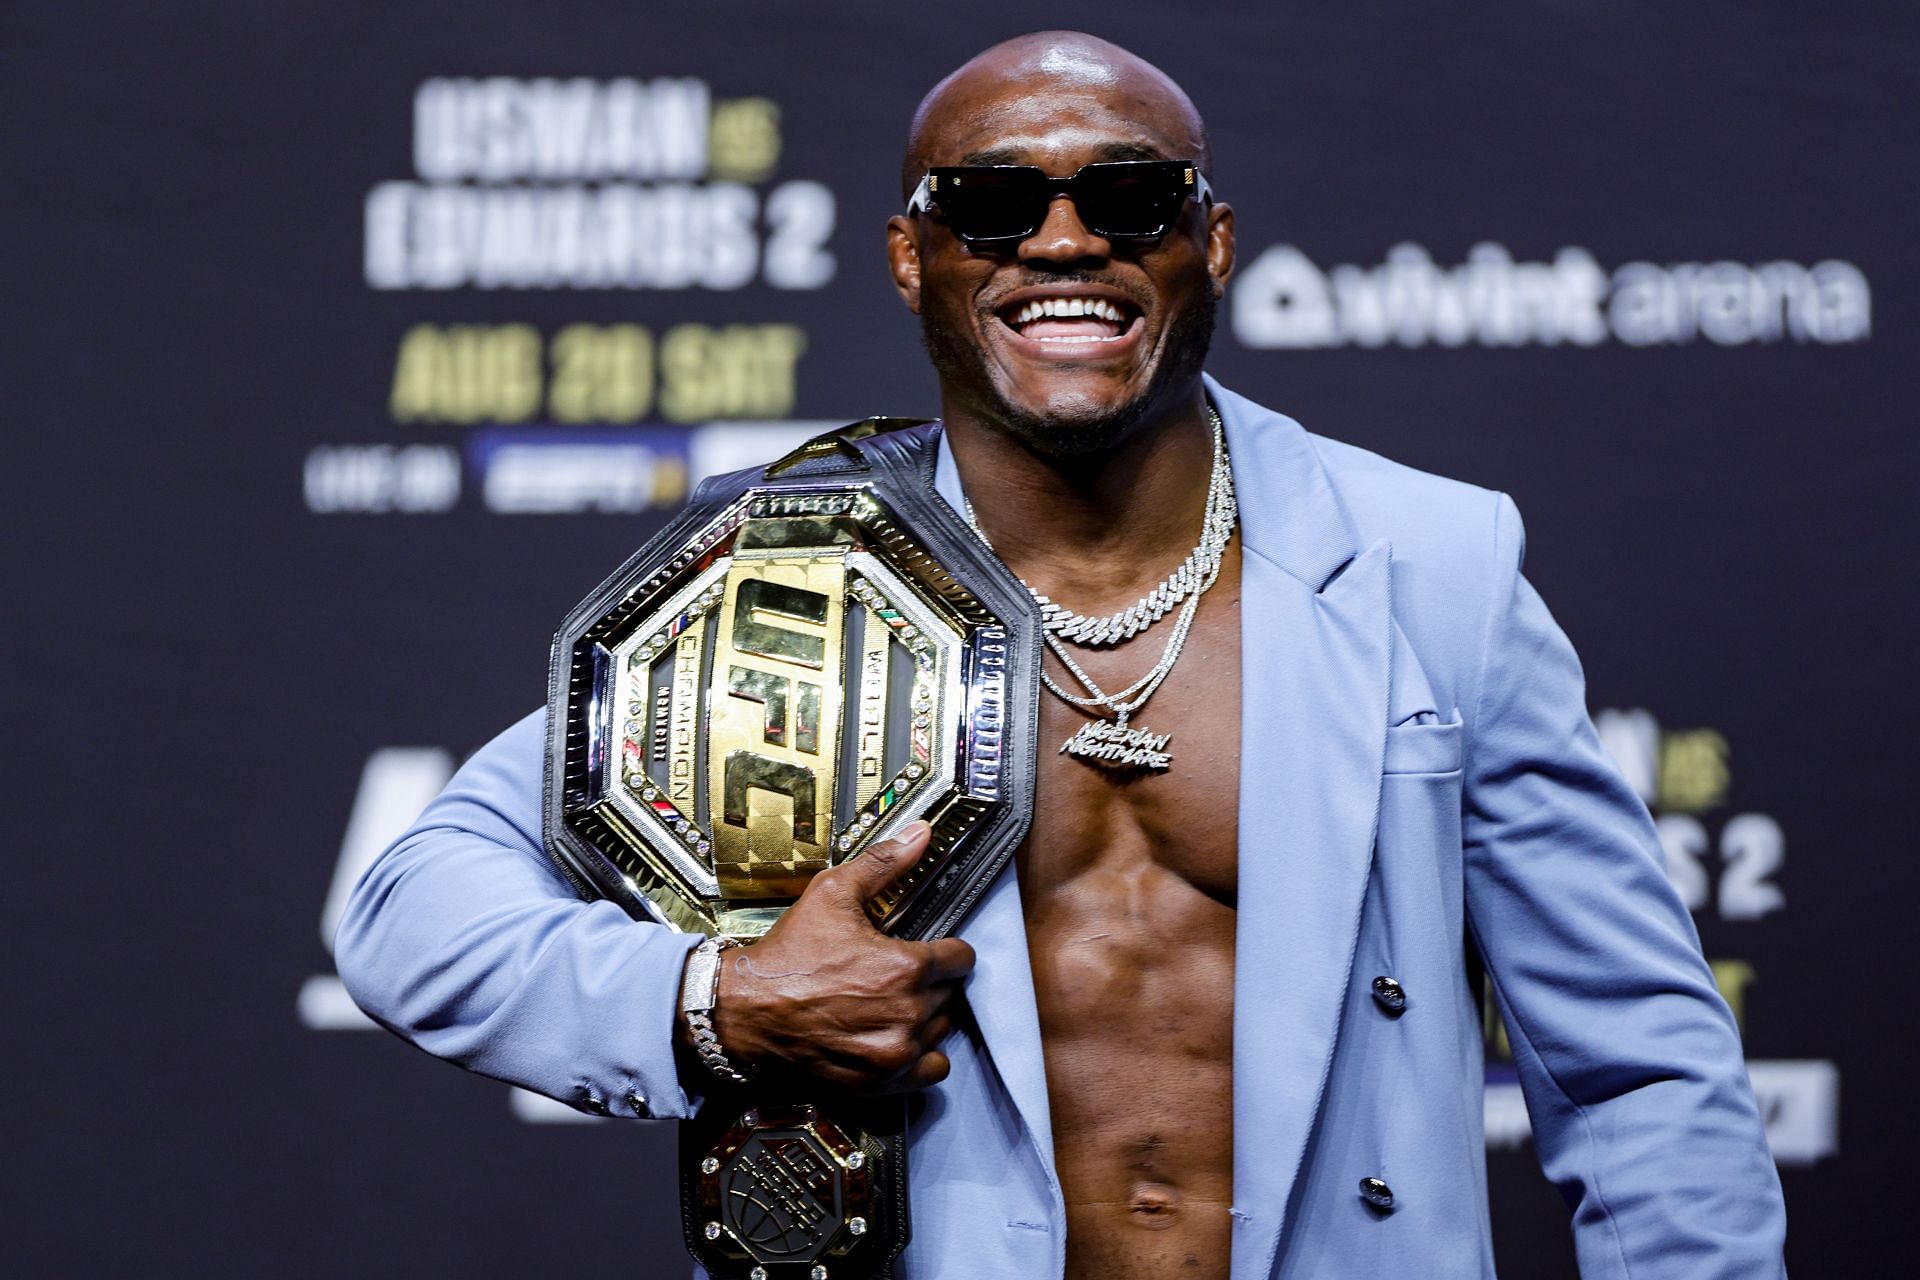 Kamaru Usman has always put his legacy ahead of his reputation in the eyes of the fans